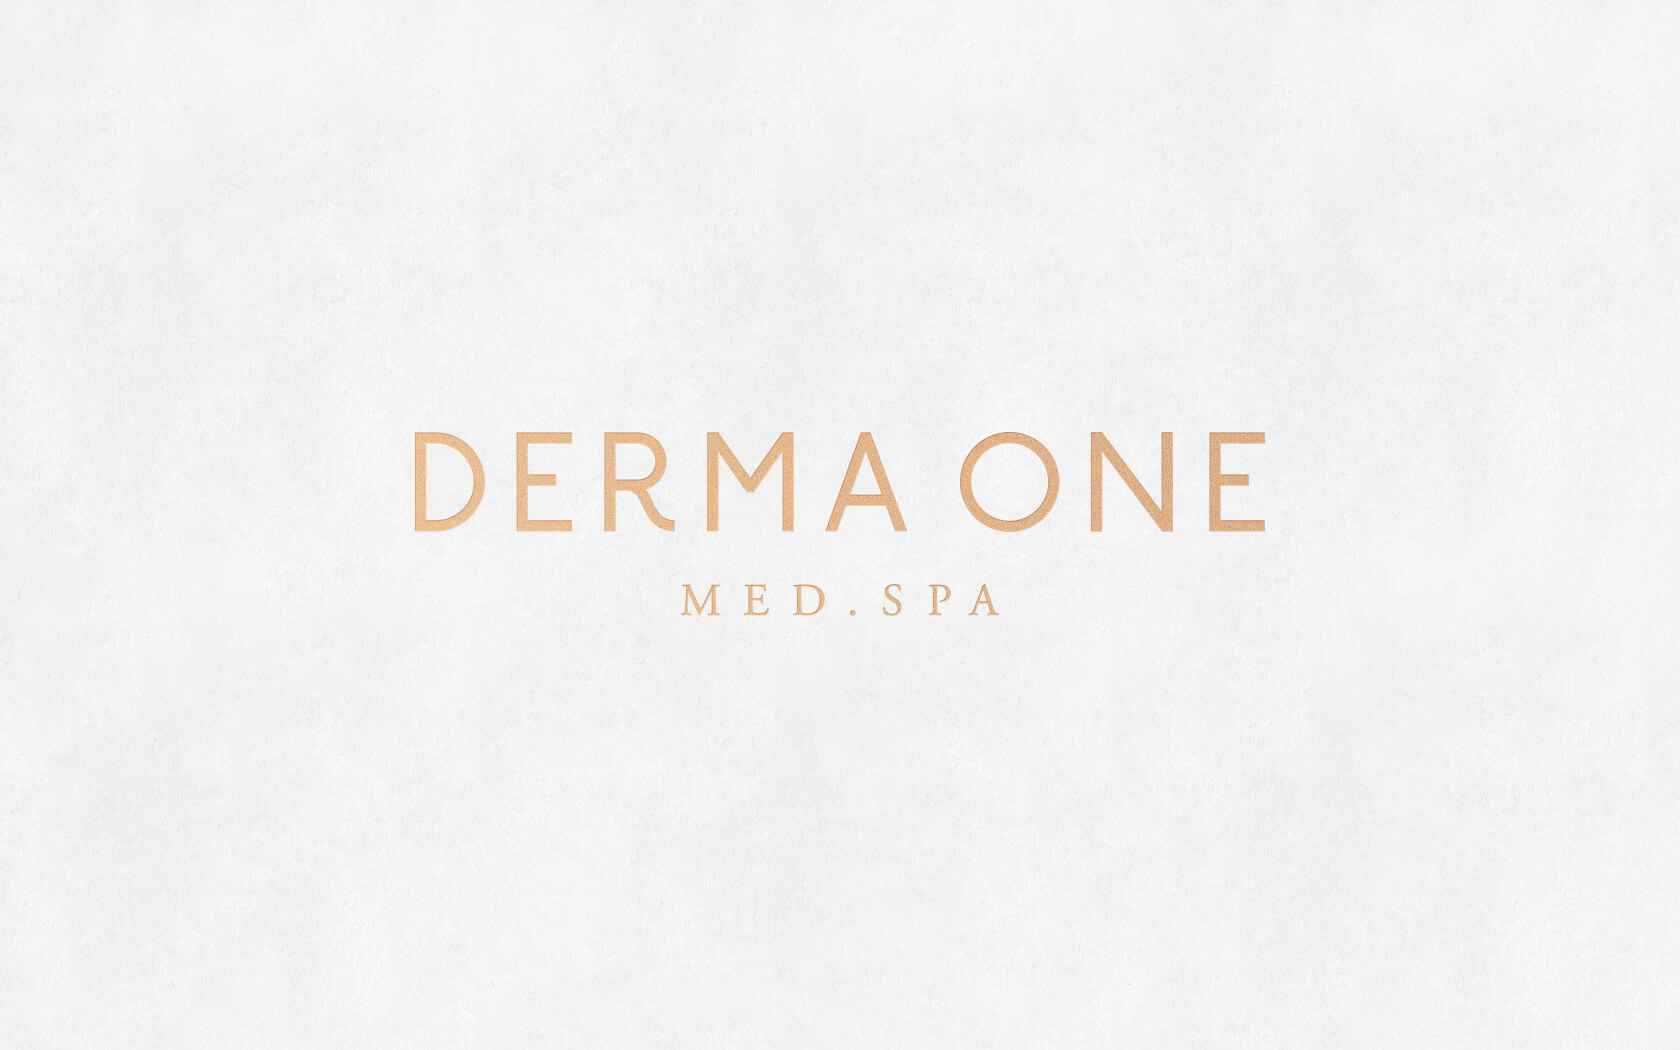 Derma One. Brand logo with Med. Spa